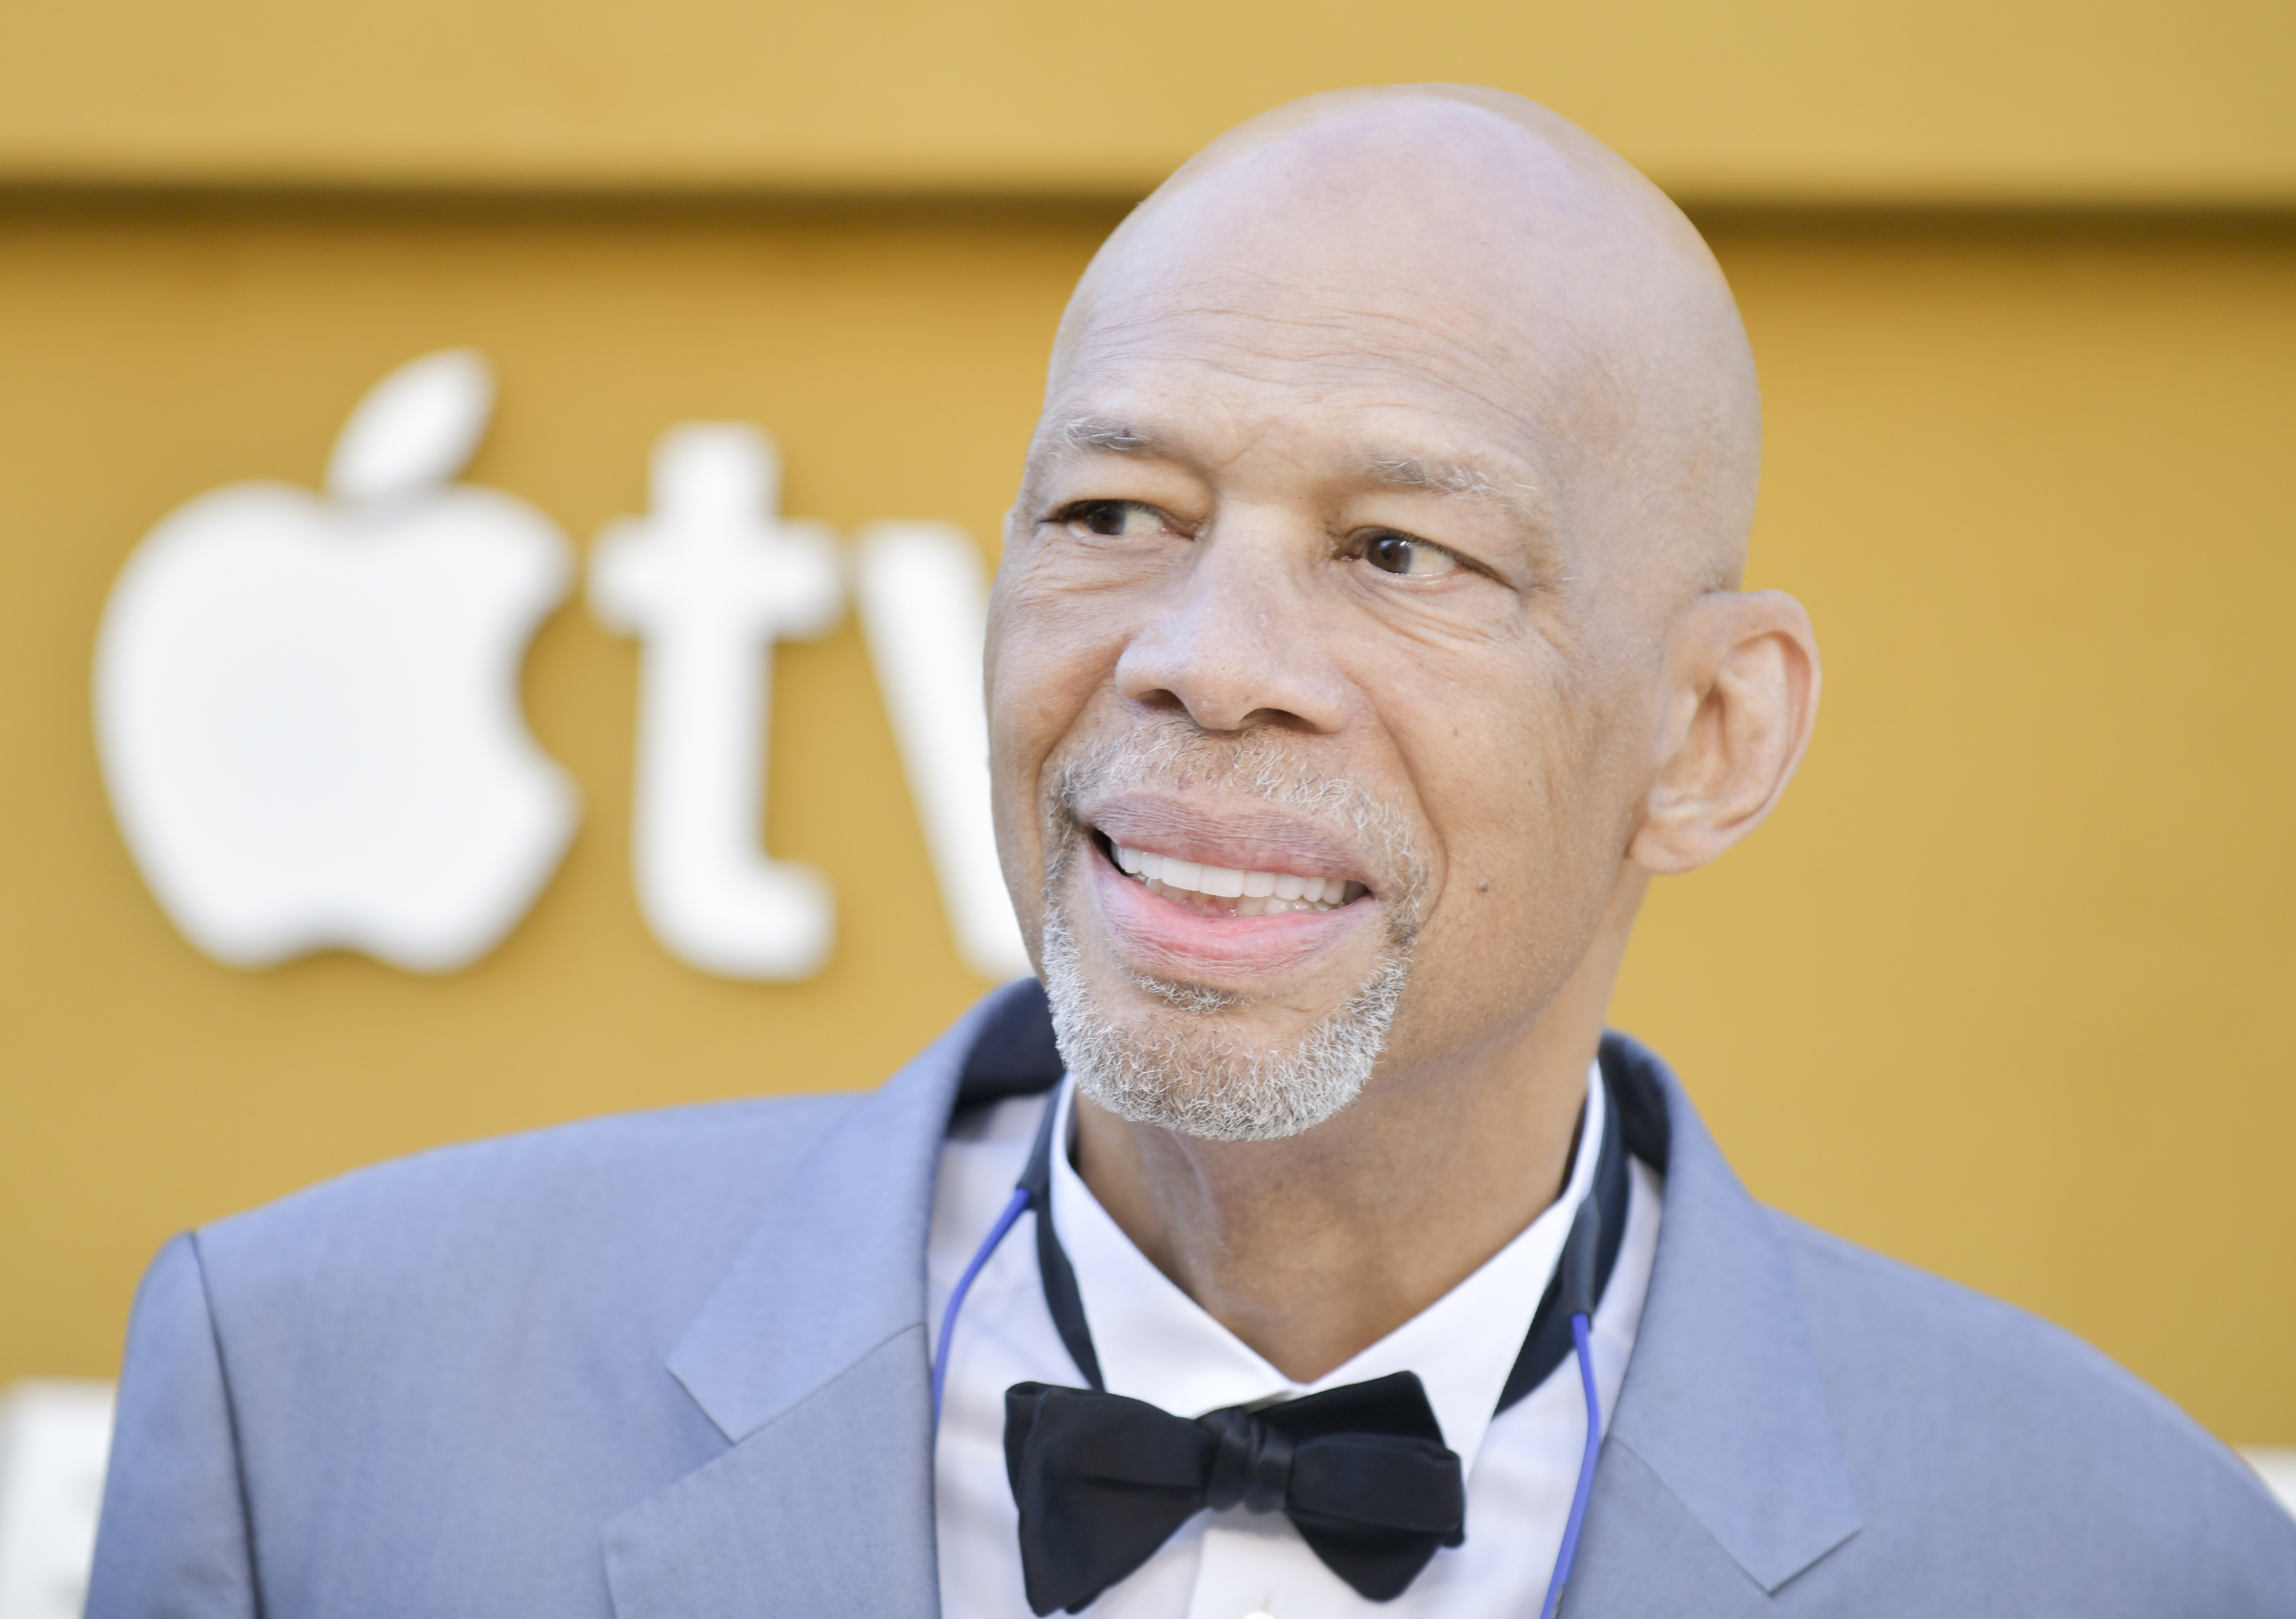 Kareem Abdul-Jabbar attends the Los Angeles premiere of Apple's "They Call Me Magic" on April 14, 2022 in Los Angeles, California (Rodin Eckenroth—Getty Images))